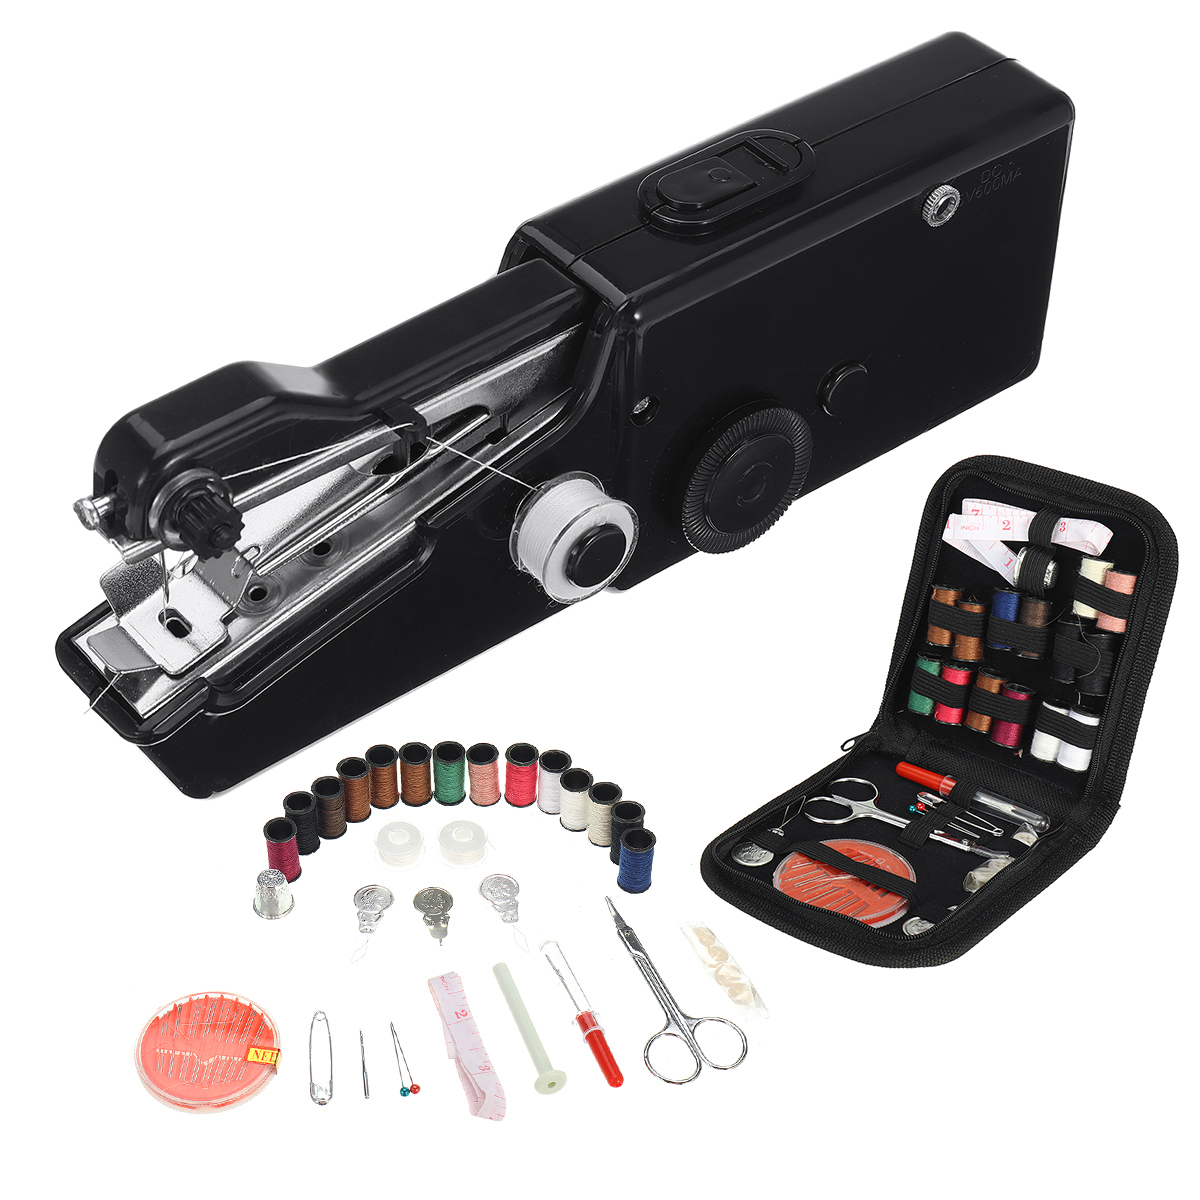 Without-Battery-Hand-held-Electric-Sewing-Set-PinkBlackWhite-Hand-held-Sewing-Machine-1890507-7